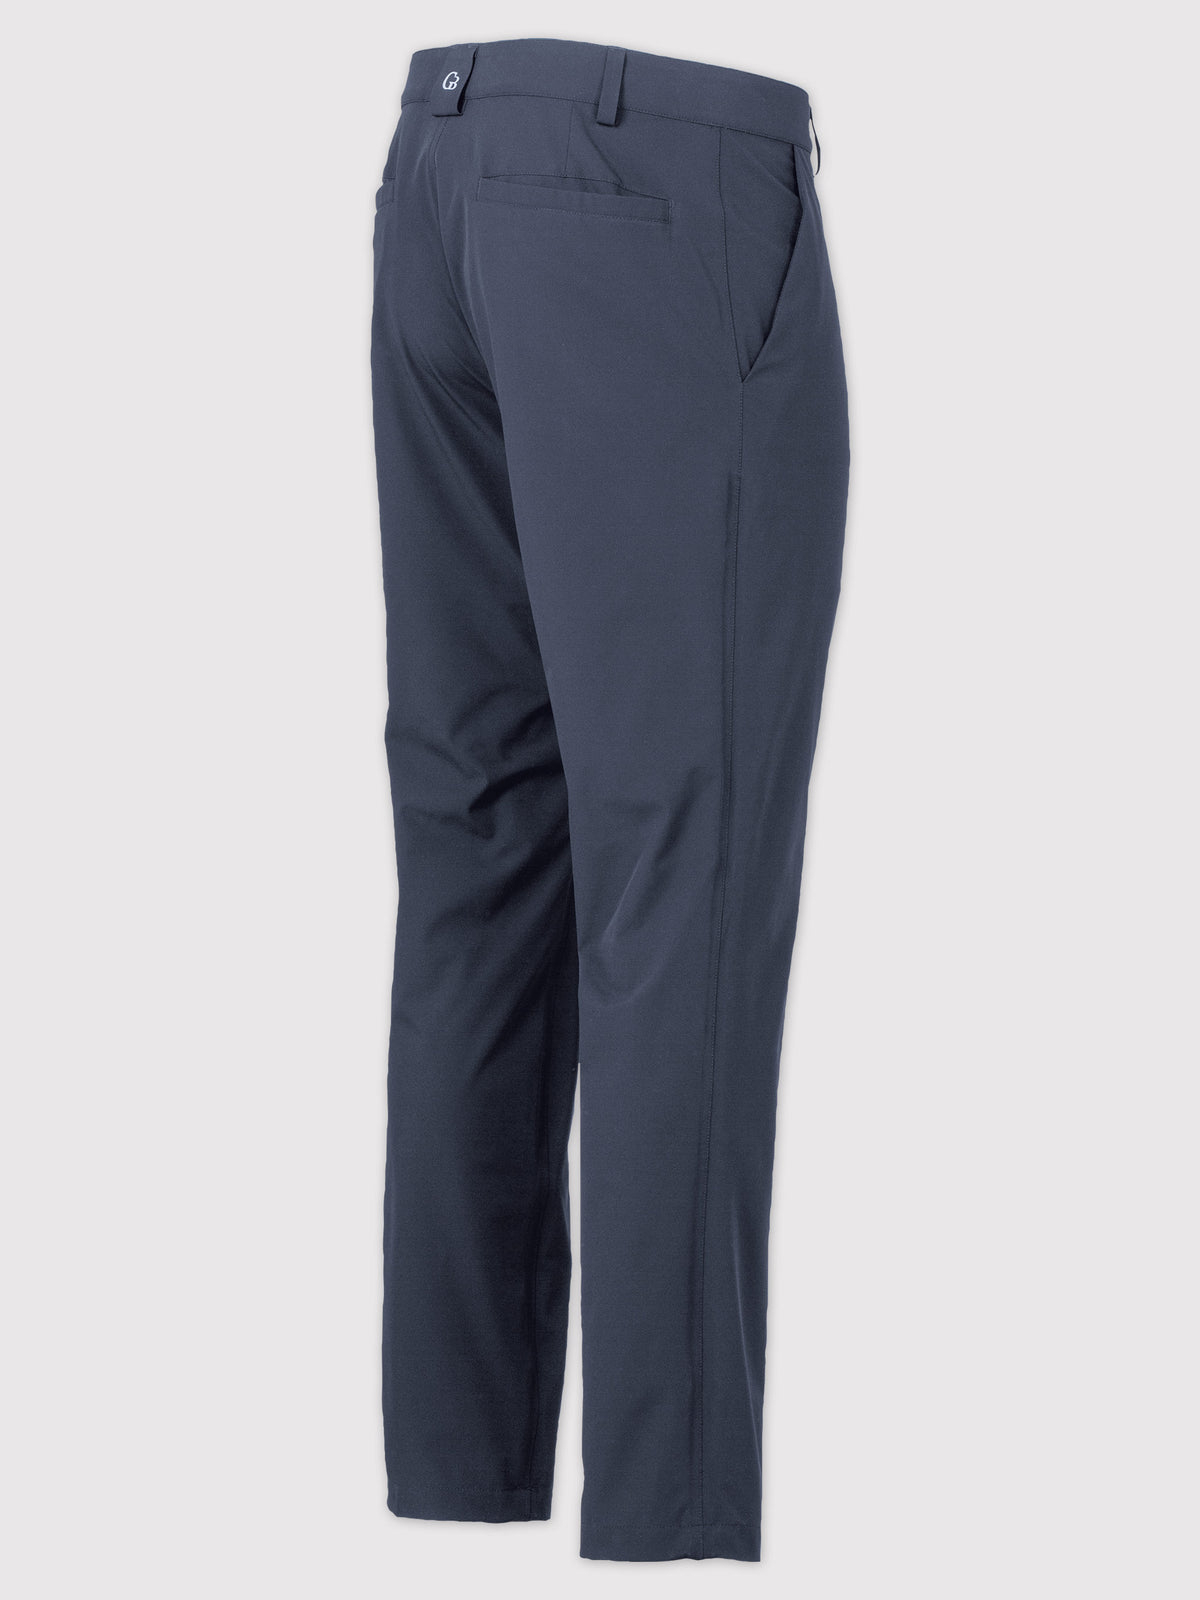 The side of Slate blue All-Weather Chino